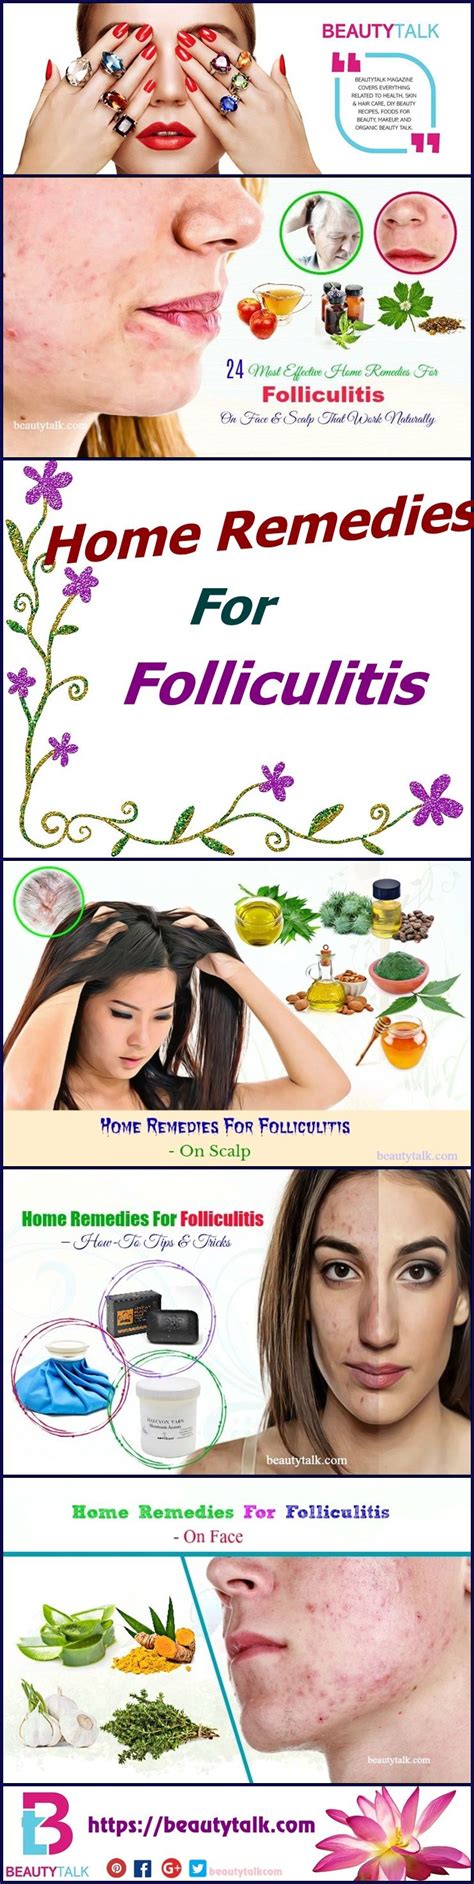 24 Most Effective Home Remedies For Folliculitis On Face And Scalp That